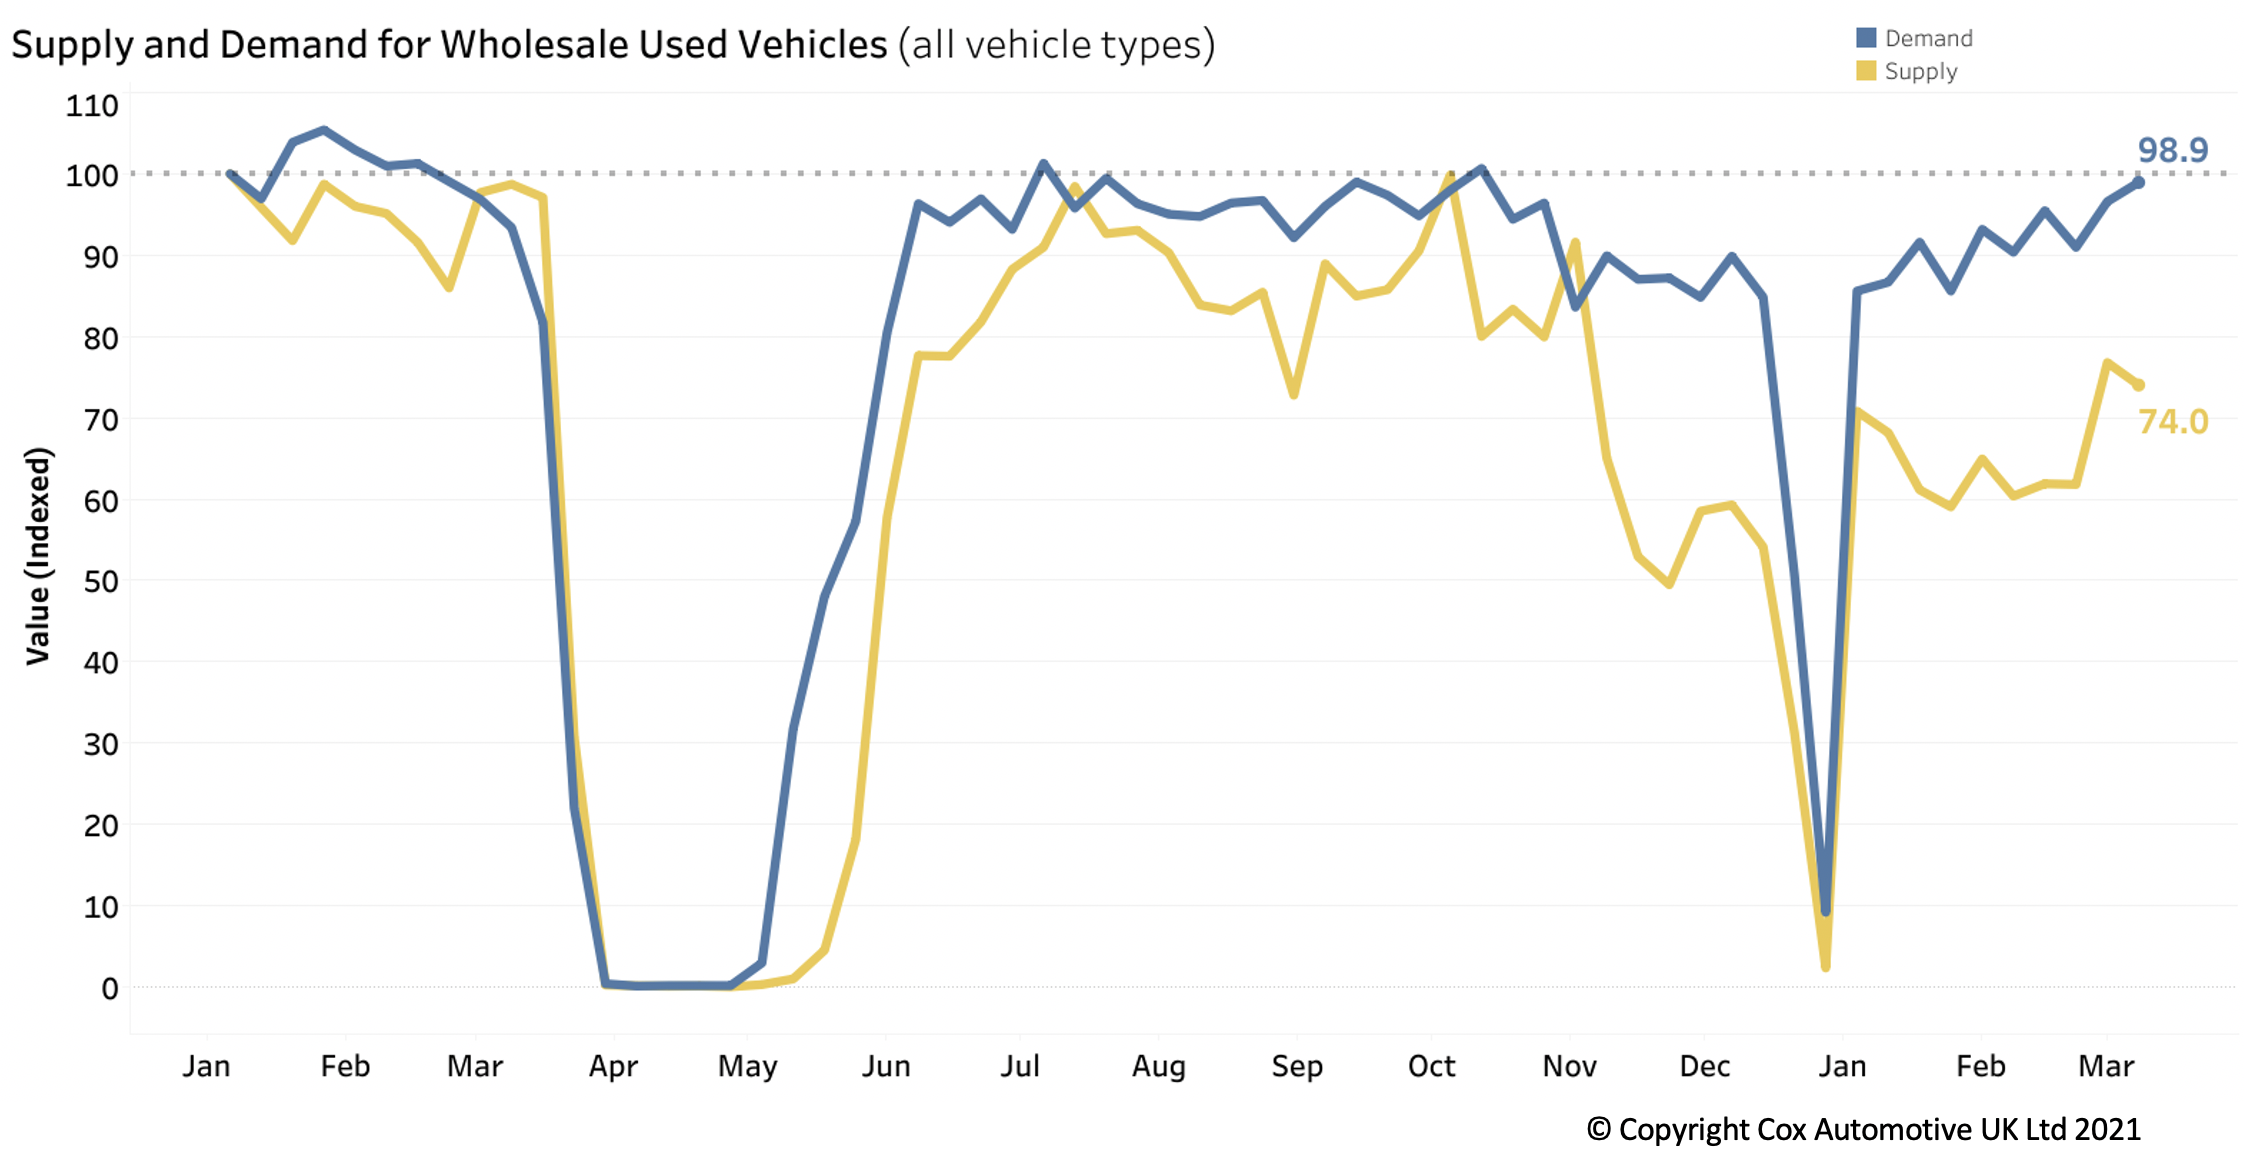 Wholesale used car supply and demand index